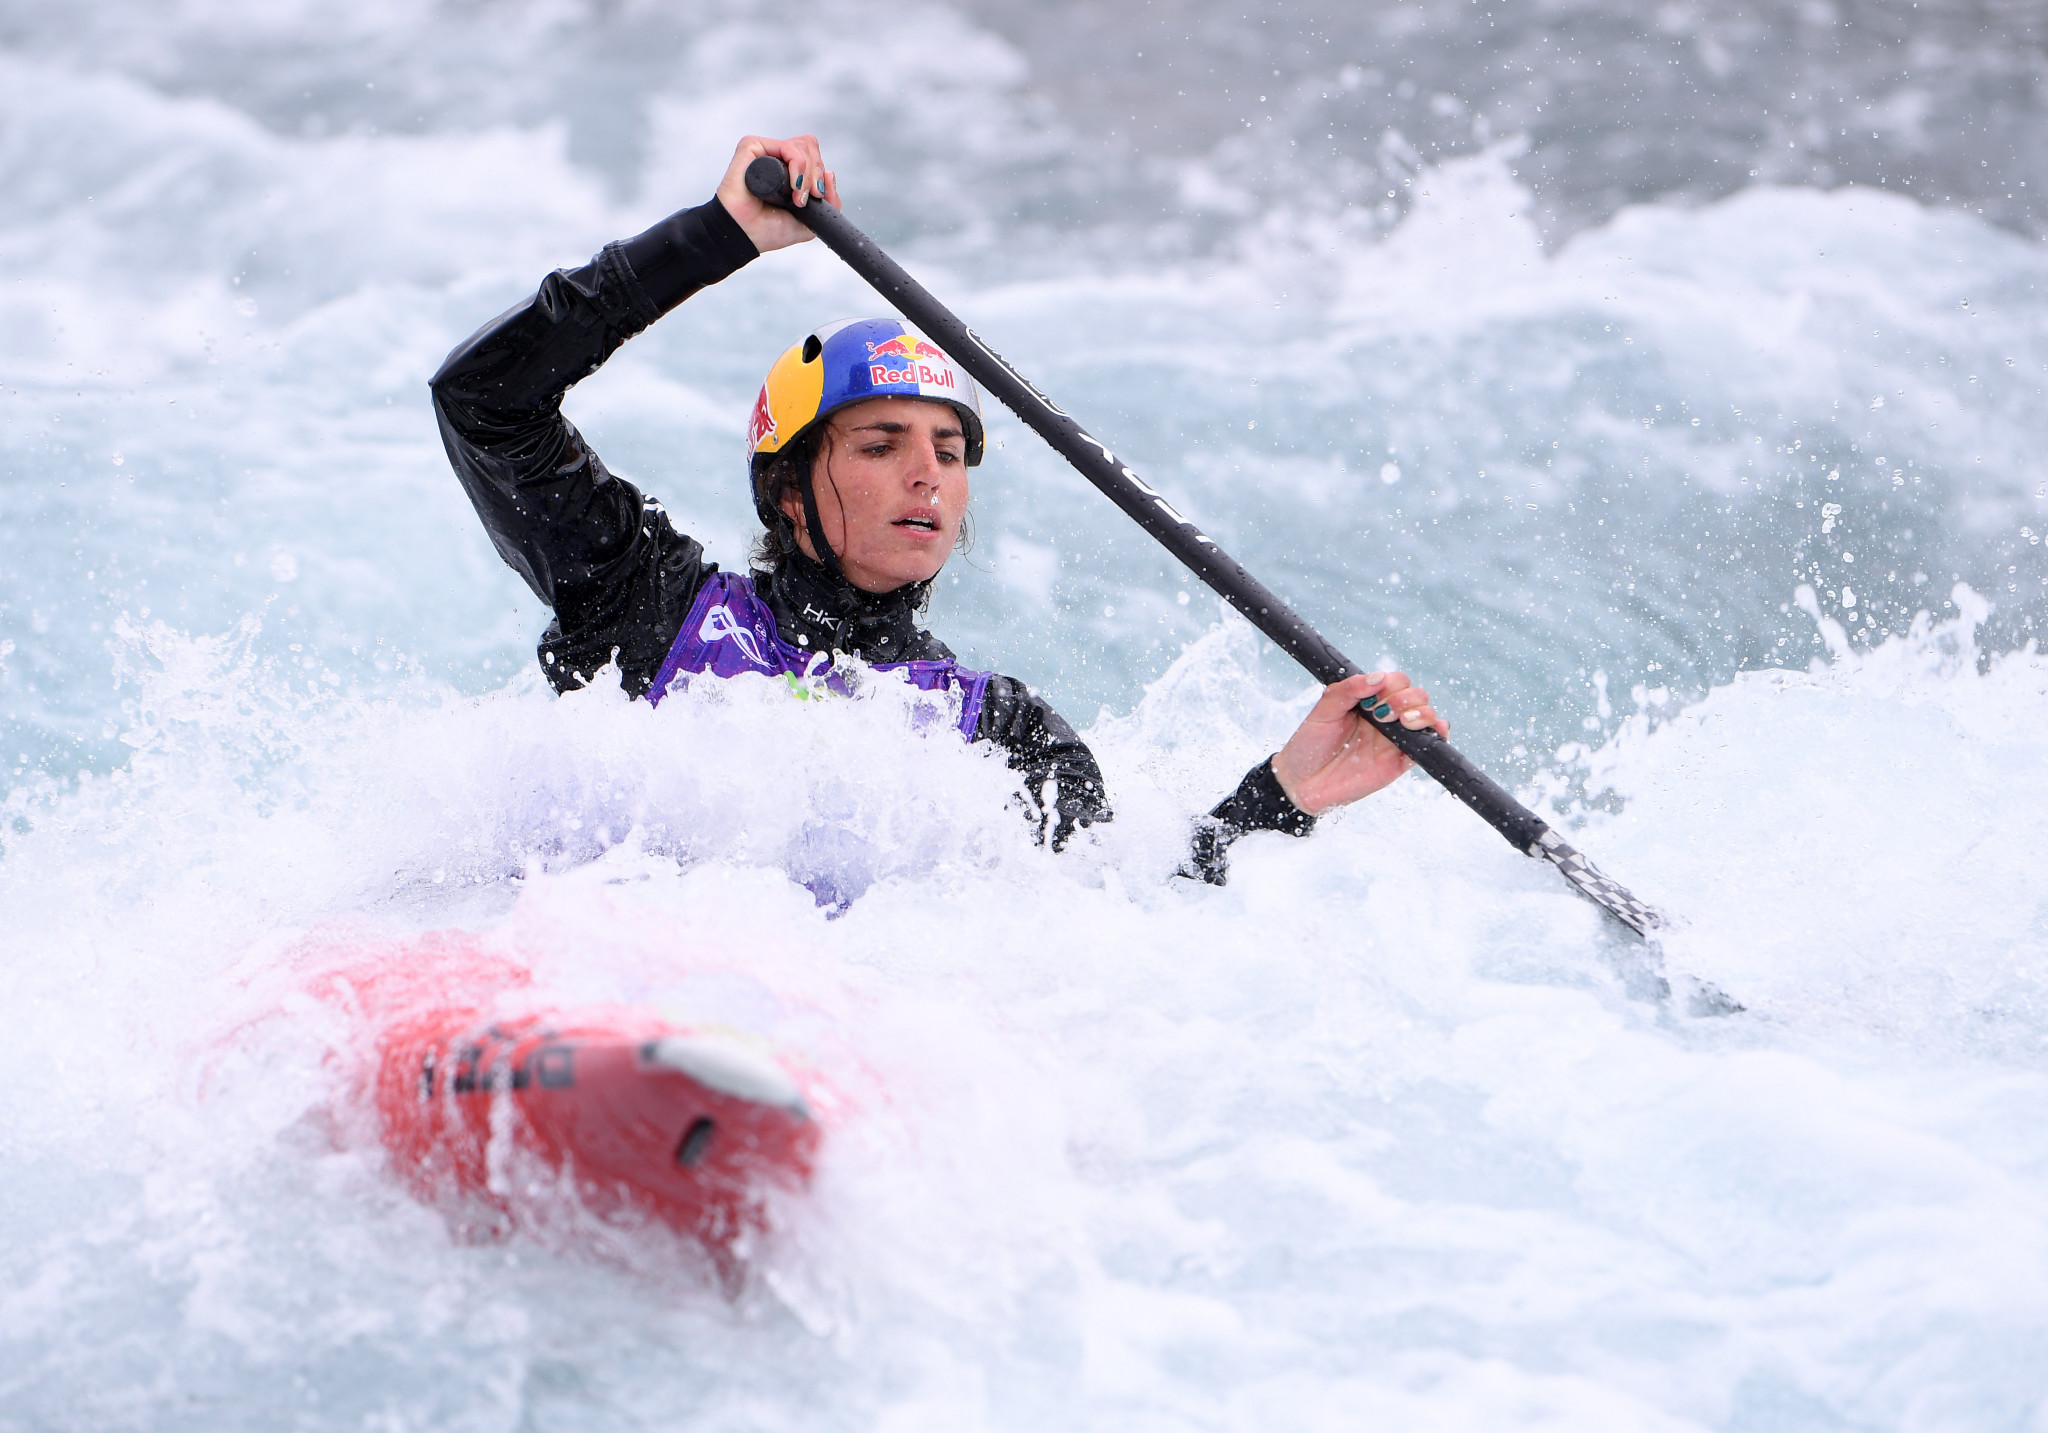 Jessica Fox etained her overall K1 title in Prague ©ICF